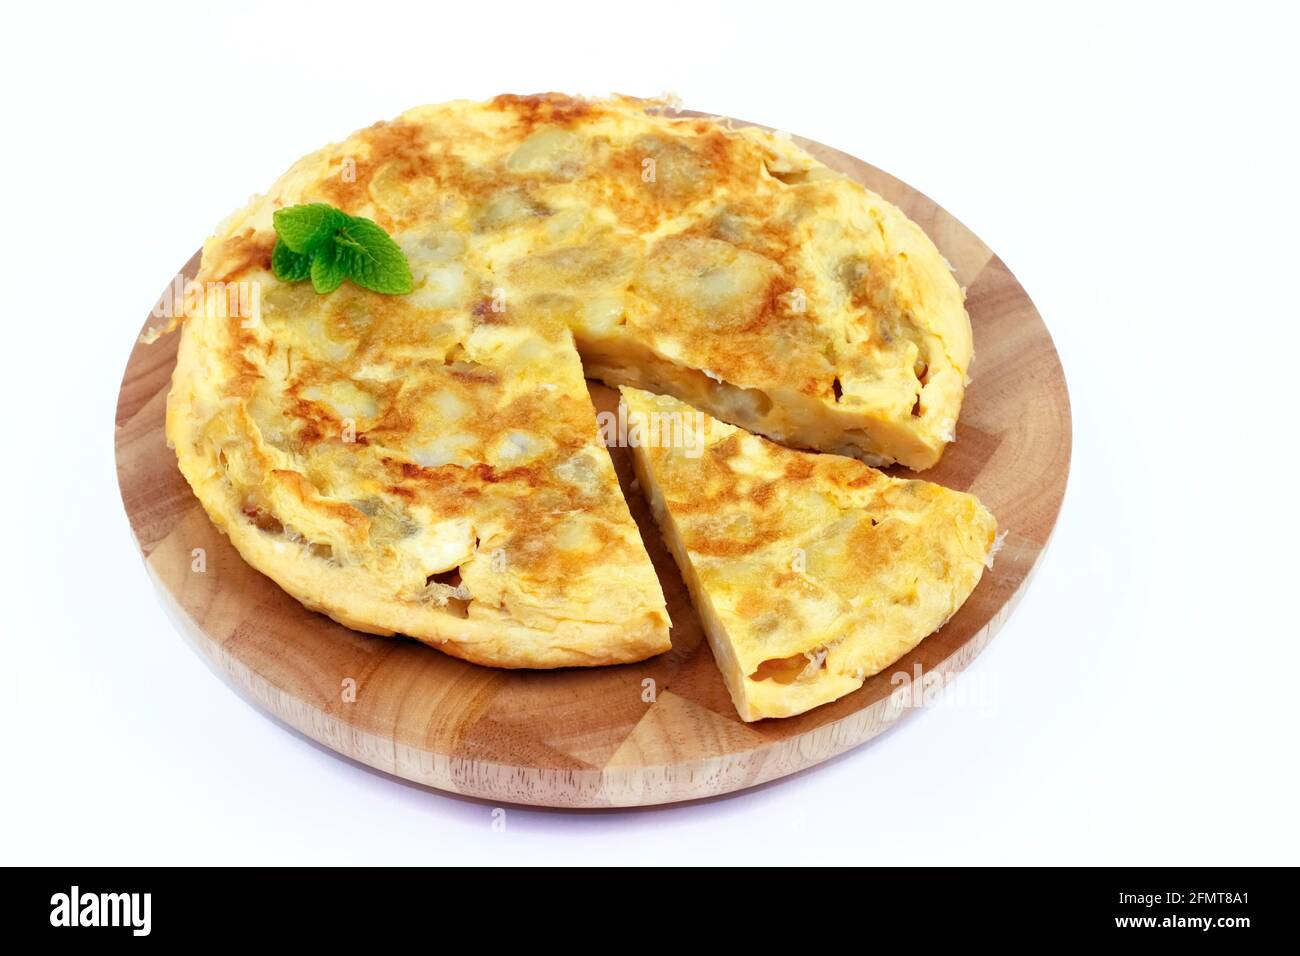 Spanish omelette with potatoes, parsley leaf gift auction Stock Photo